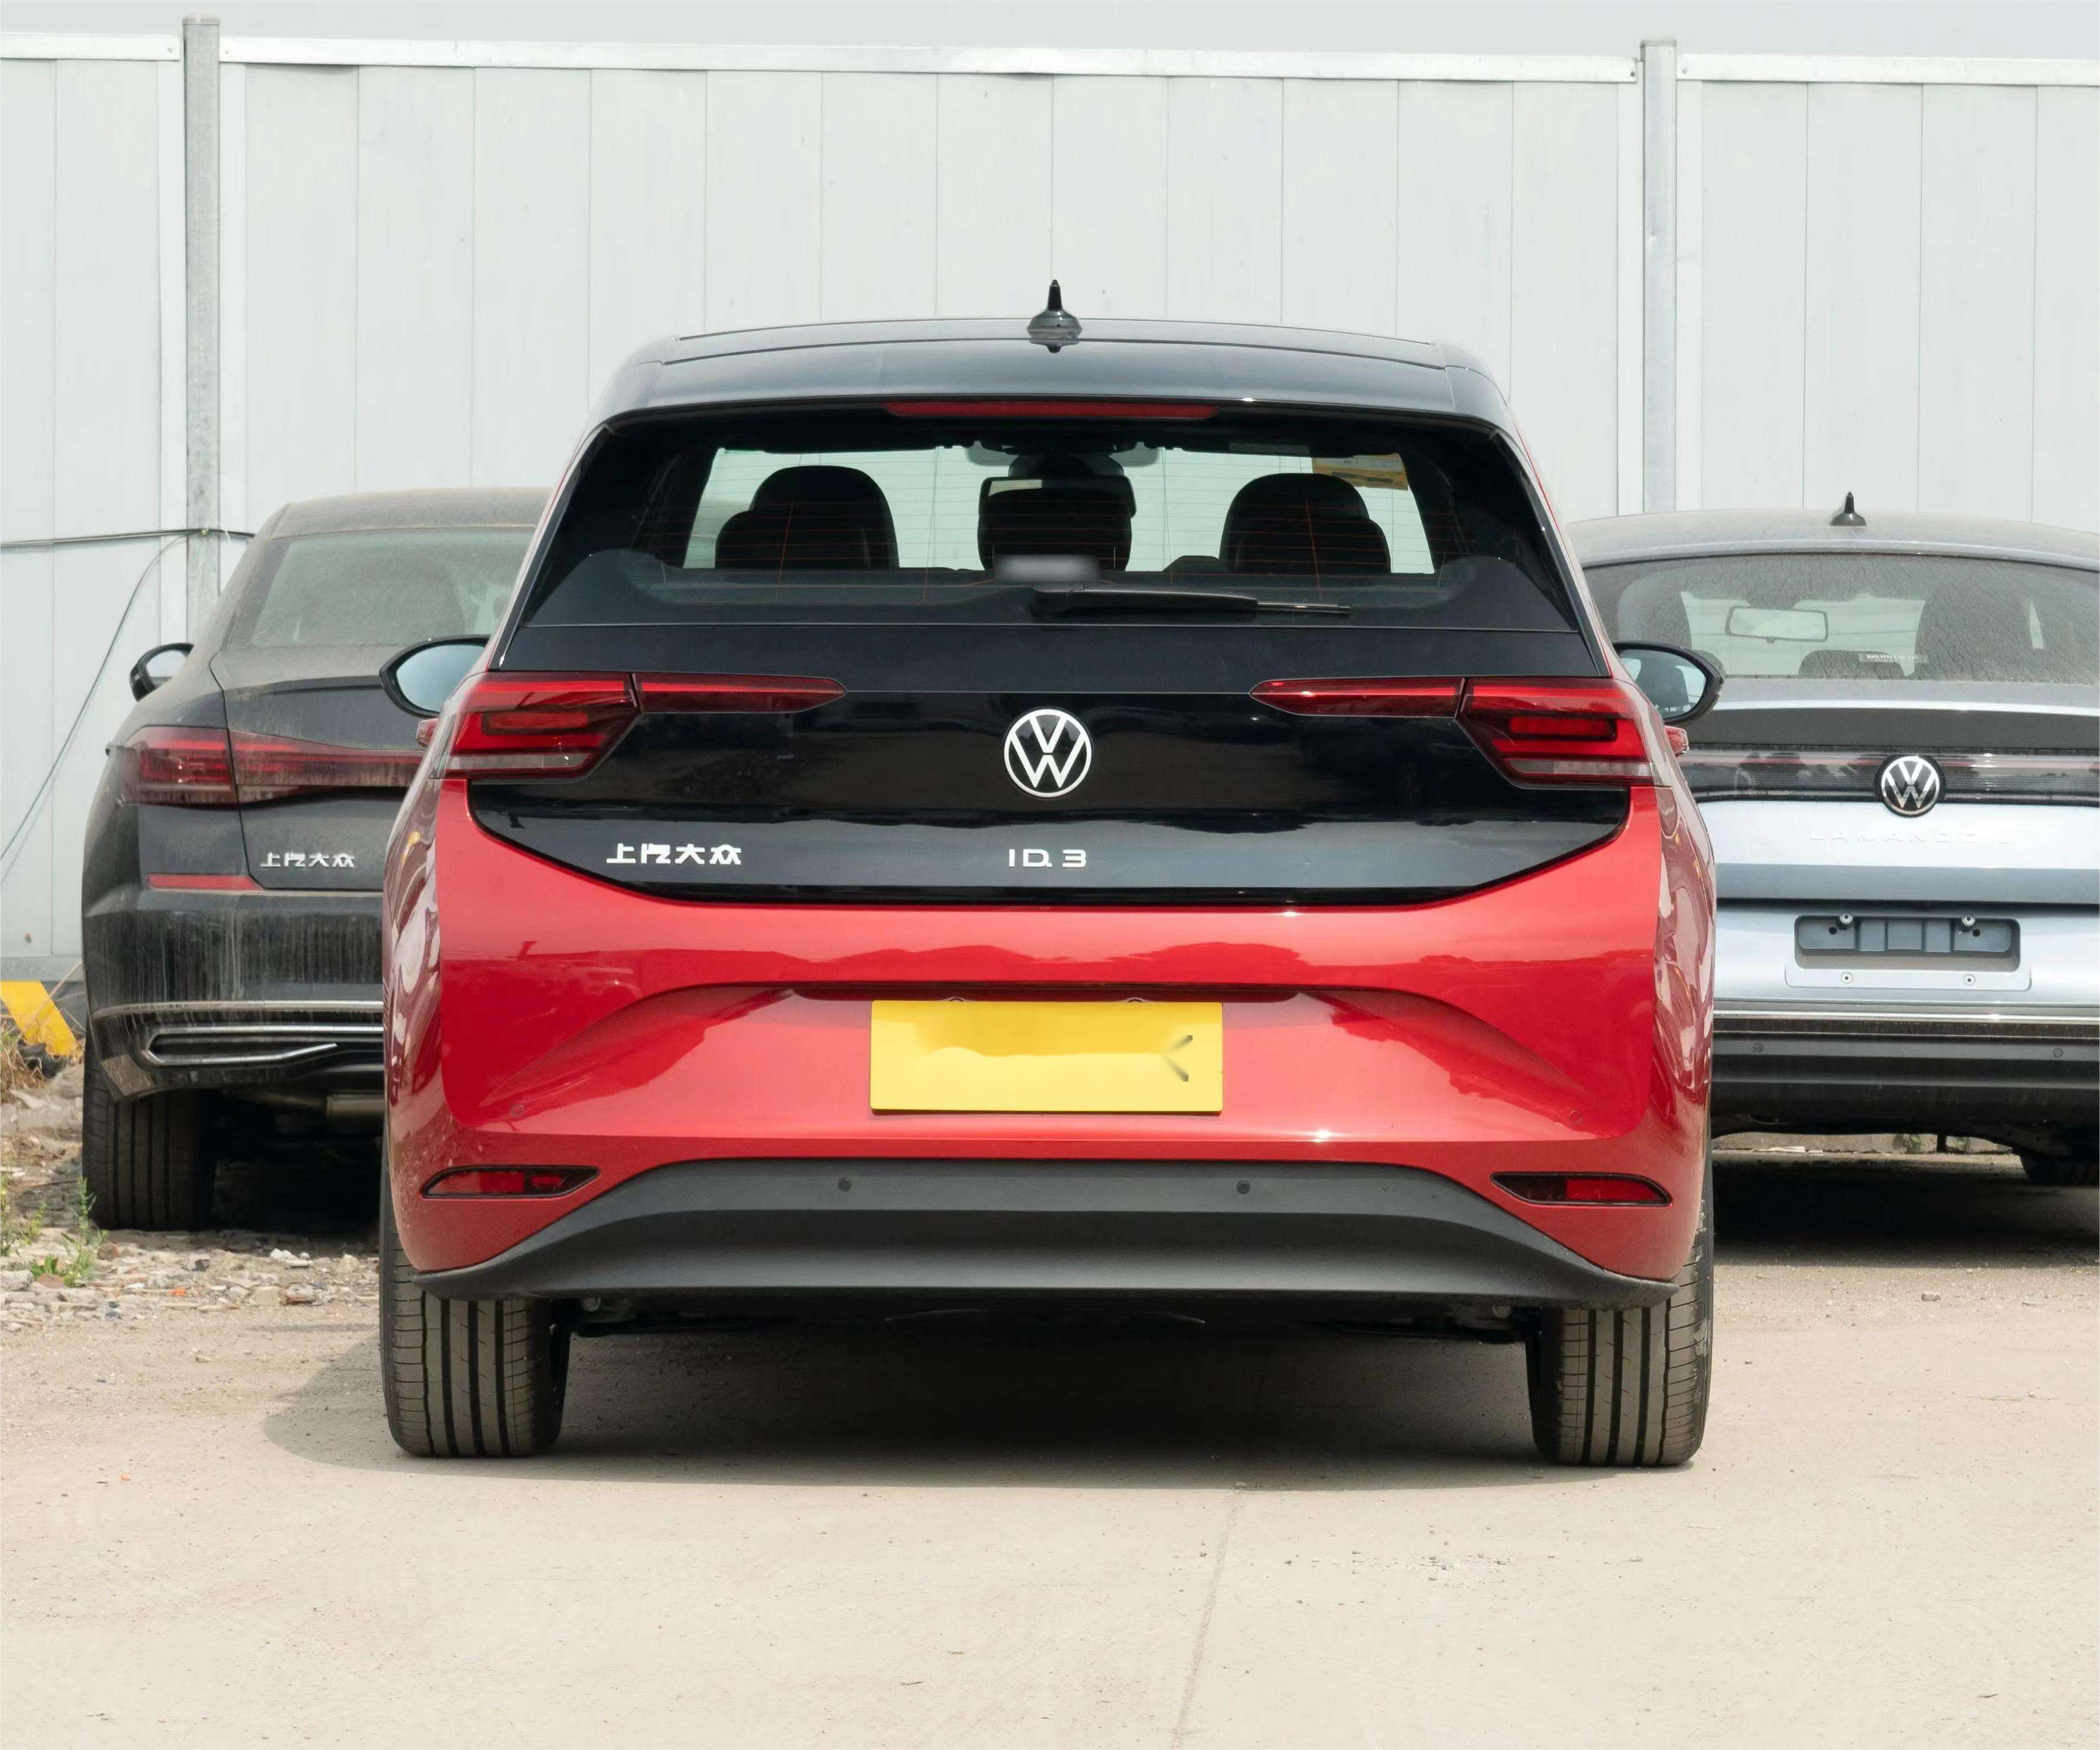 New energy vehicles2023 upgraded ultra-intelligent version of Volkswagen ID3 450 km long battery life pure electric details